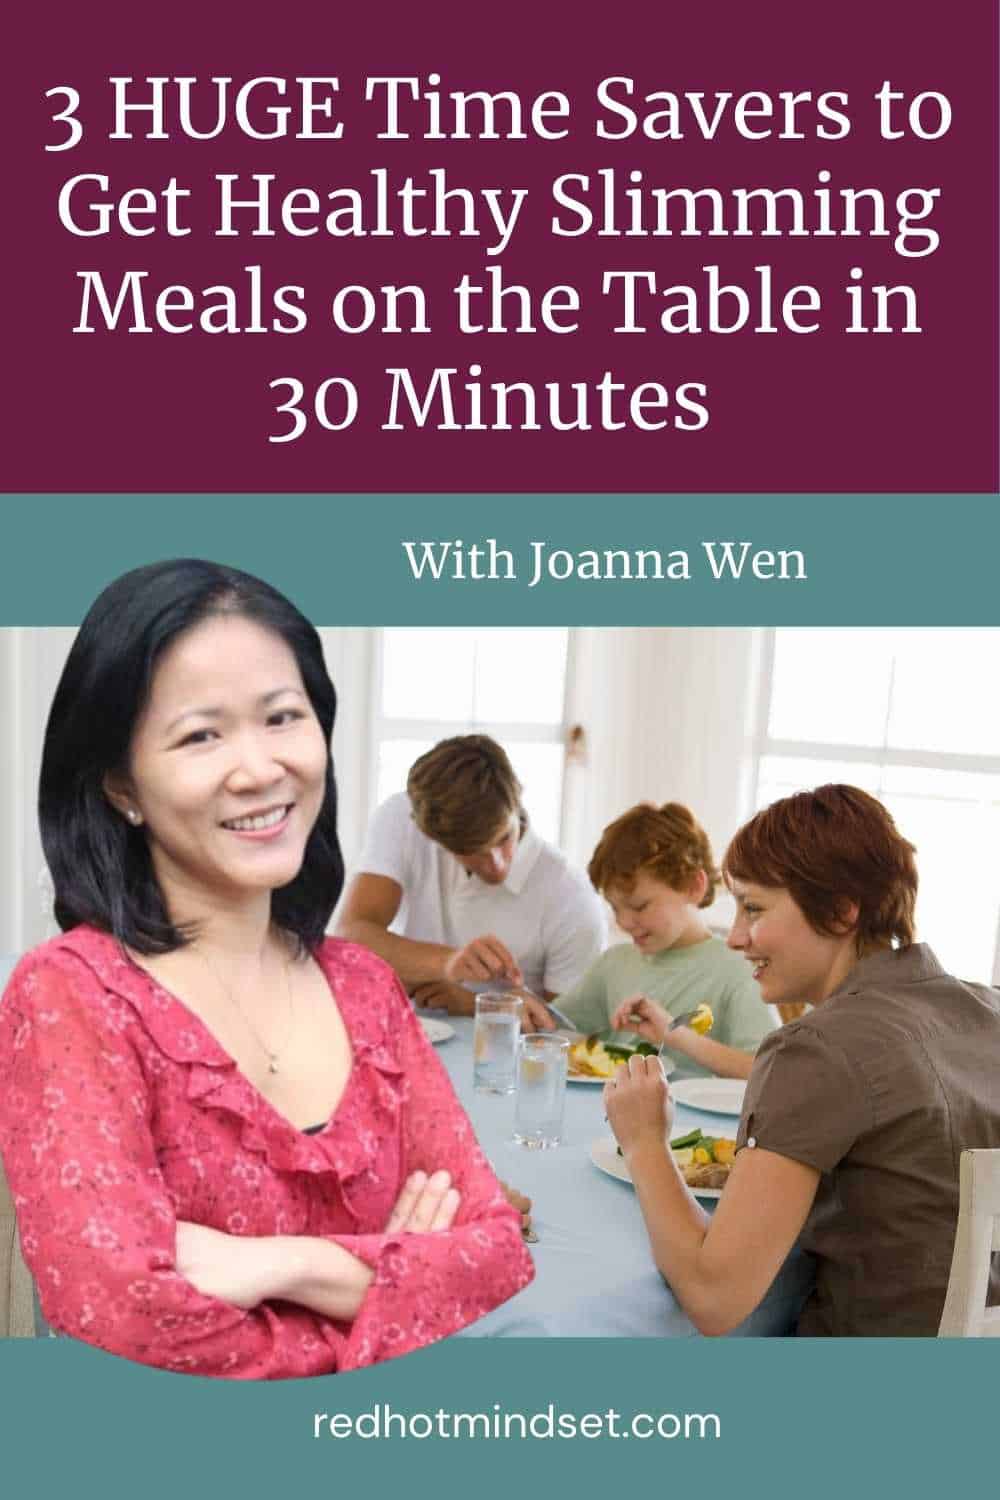 Pinterest image with headshot of woman with medium black hair smiling and crossing her arms over her pink floral blouse standing in front of an image with a mom and her two boys eating dinner and titled 3 HUGE Time Savers to Get Healthy Slimming Meals on the Table in 30 Minutes